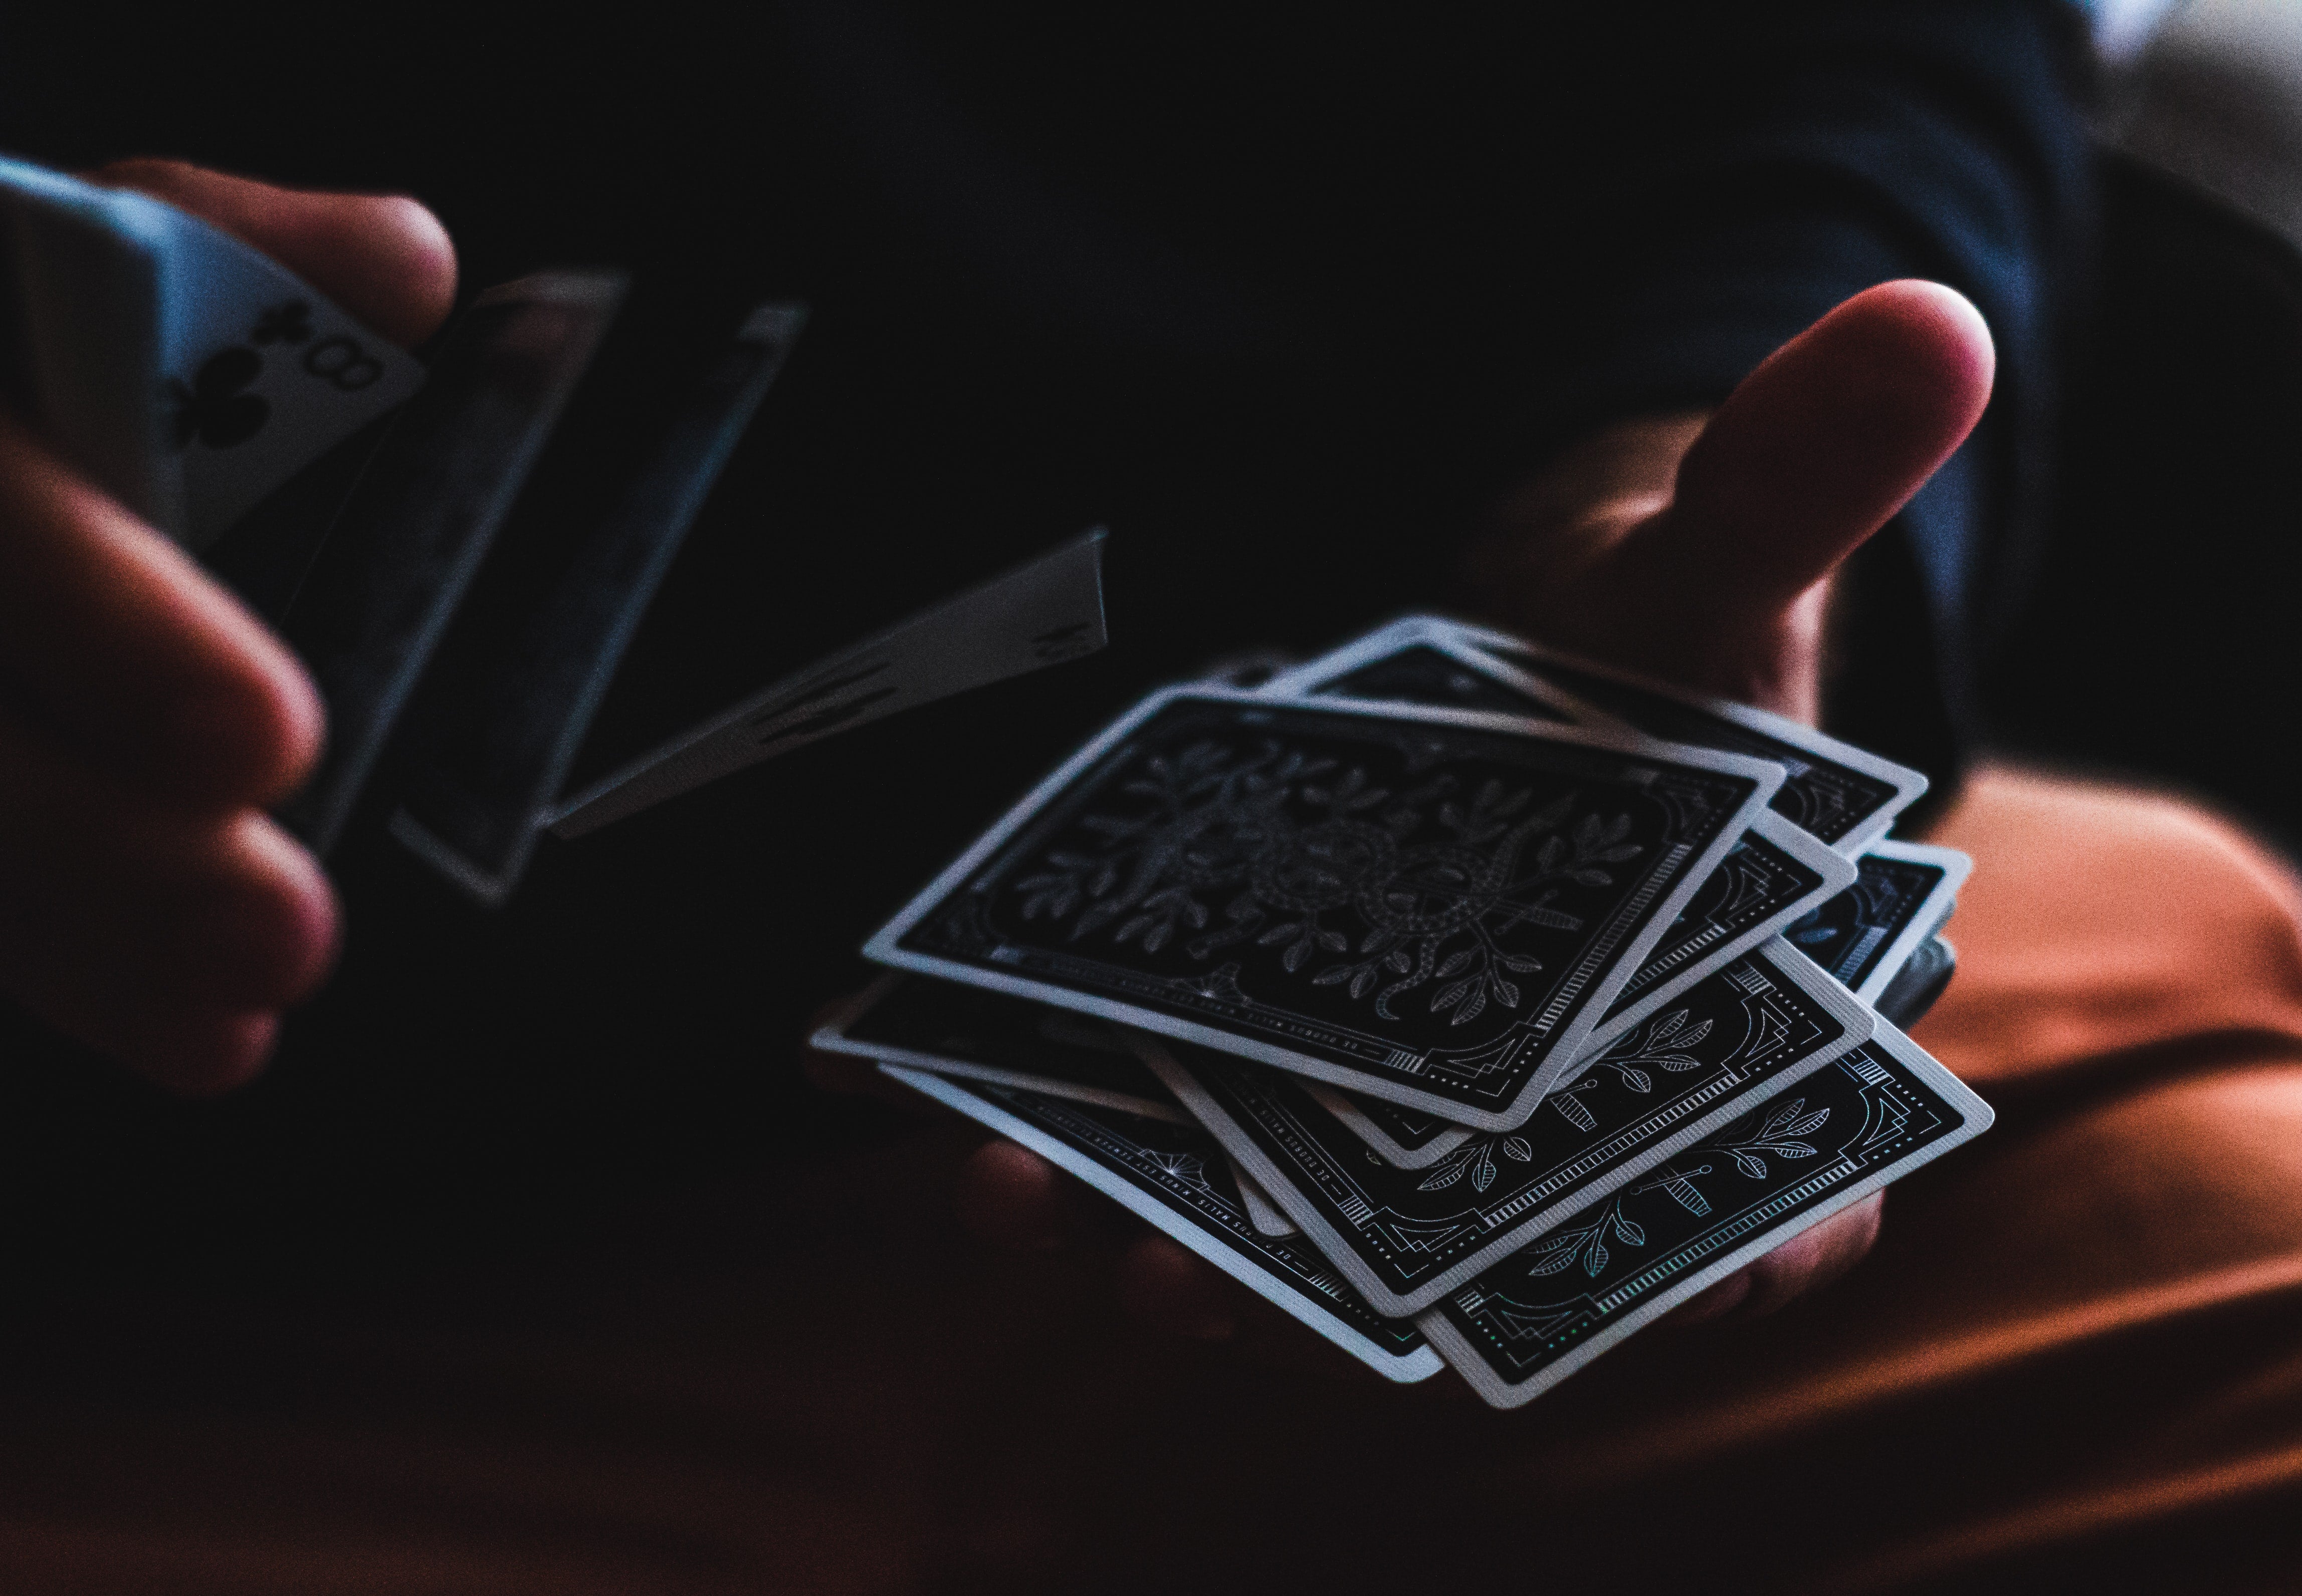 Improve your dexterity by learning Magic Tricks